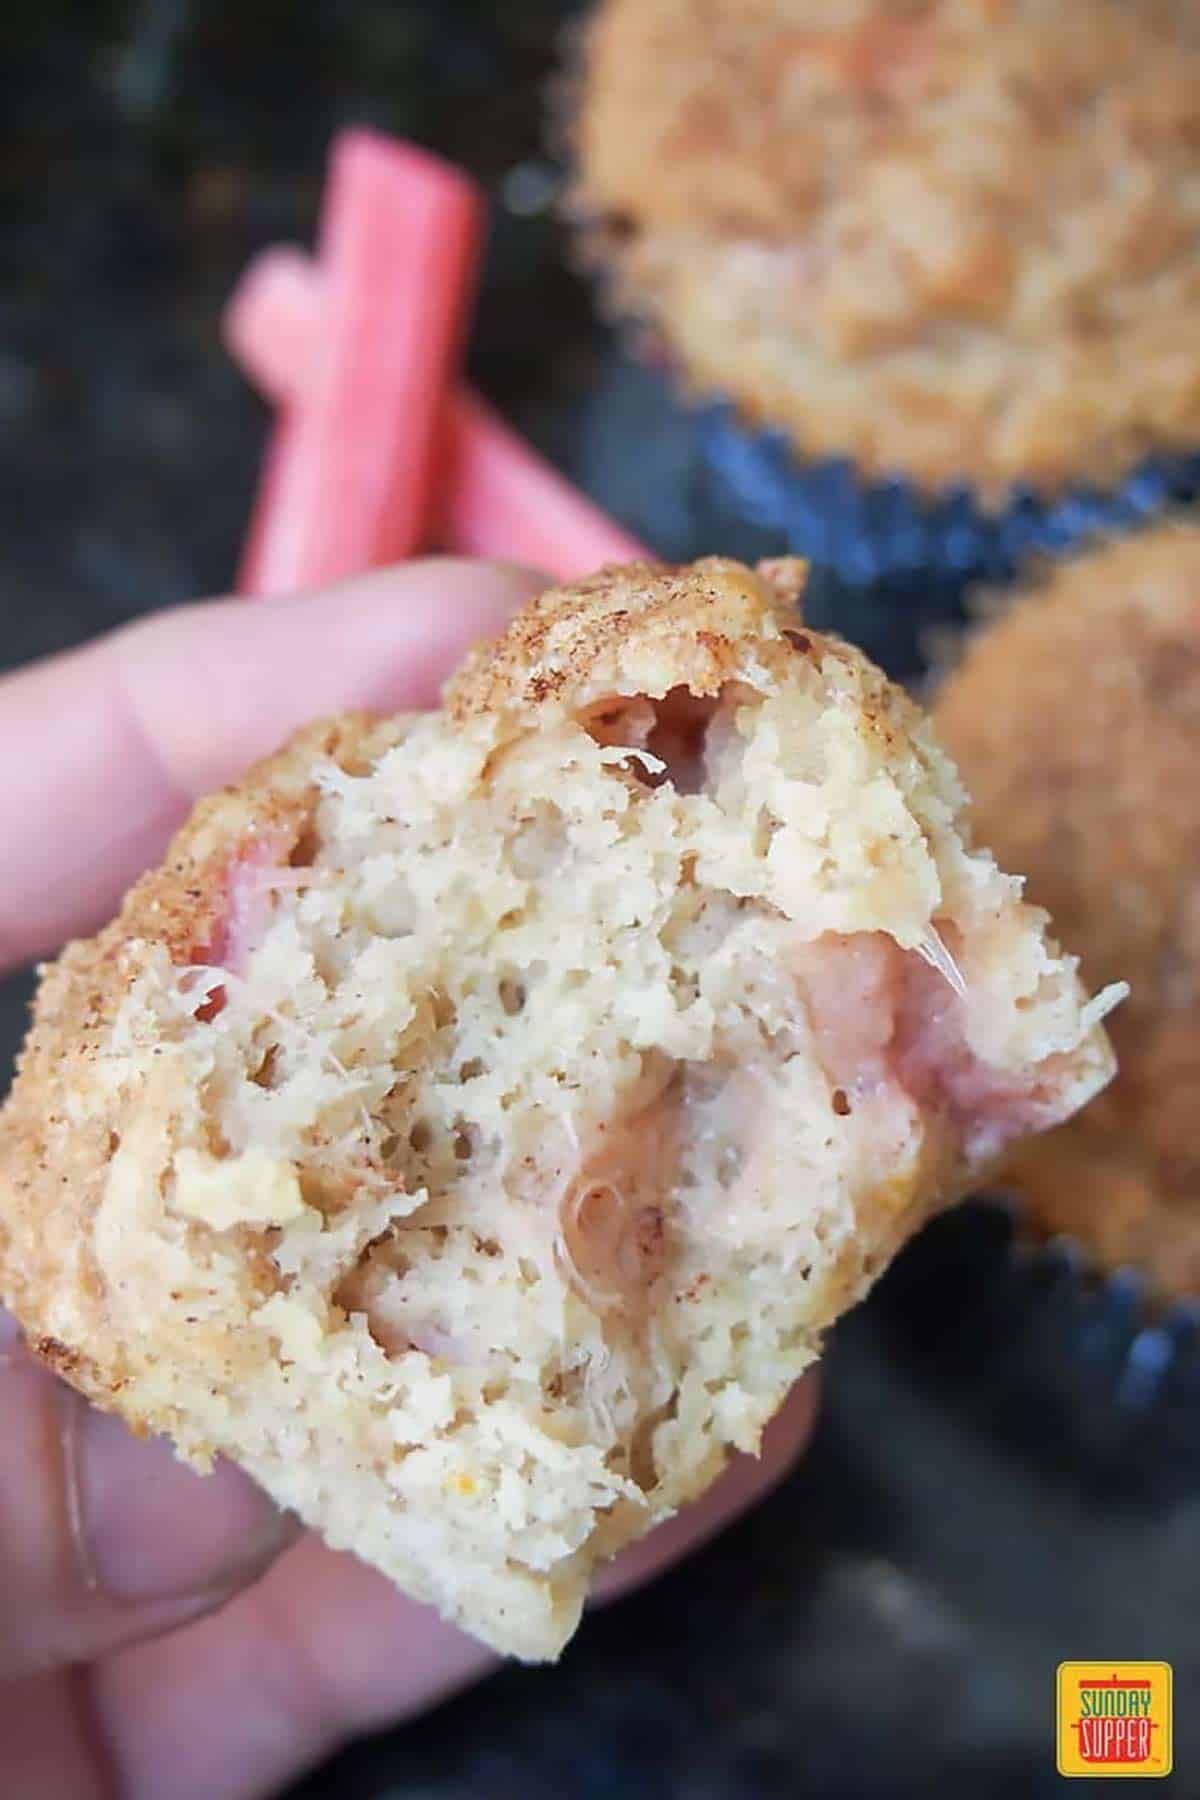 Holding a rhubarb muffin with a bite taken out of it